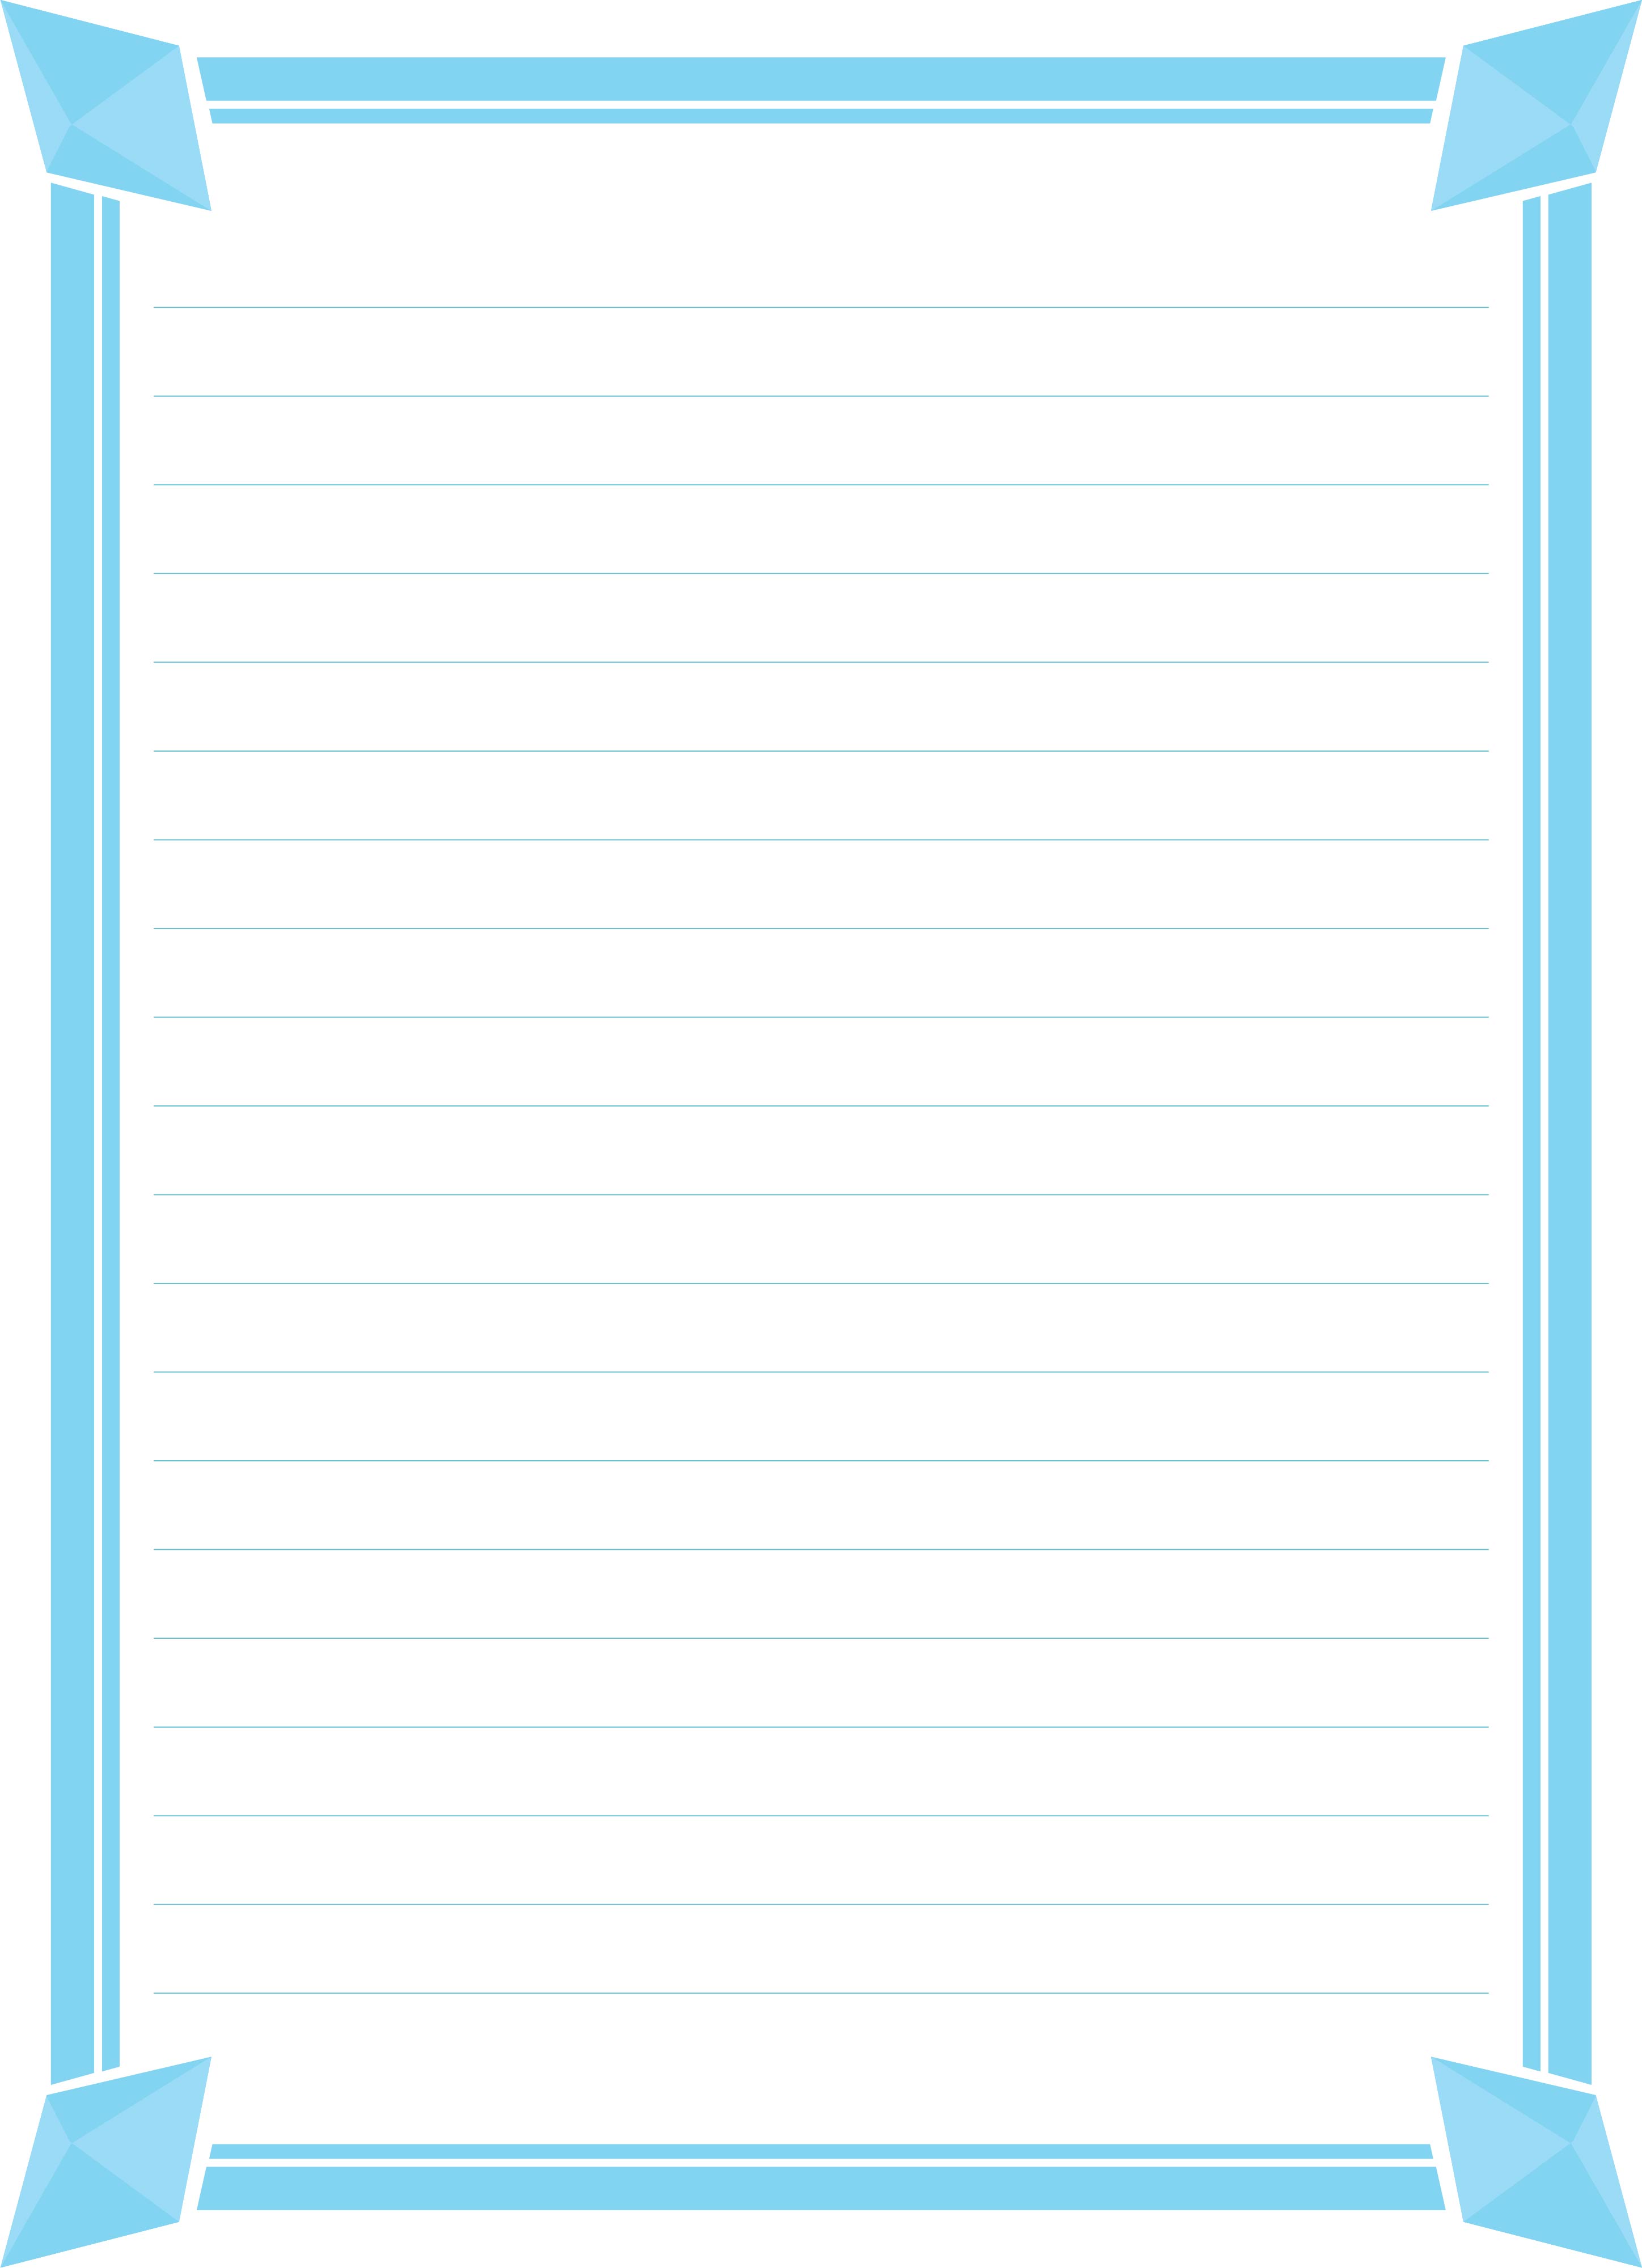 printable-lined-paper-with-border-get-what-you-need-for-free